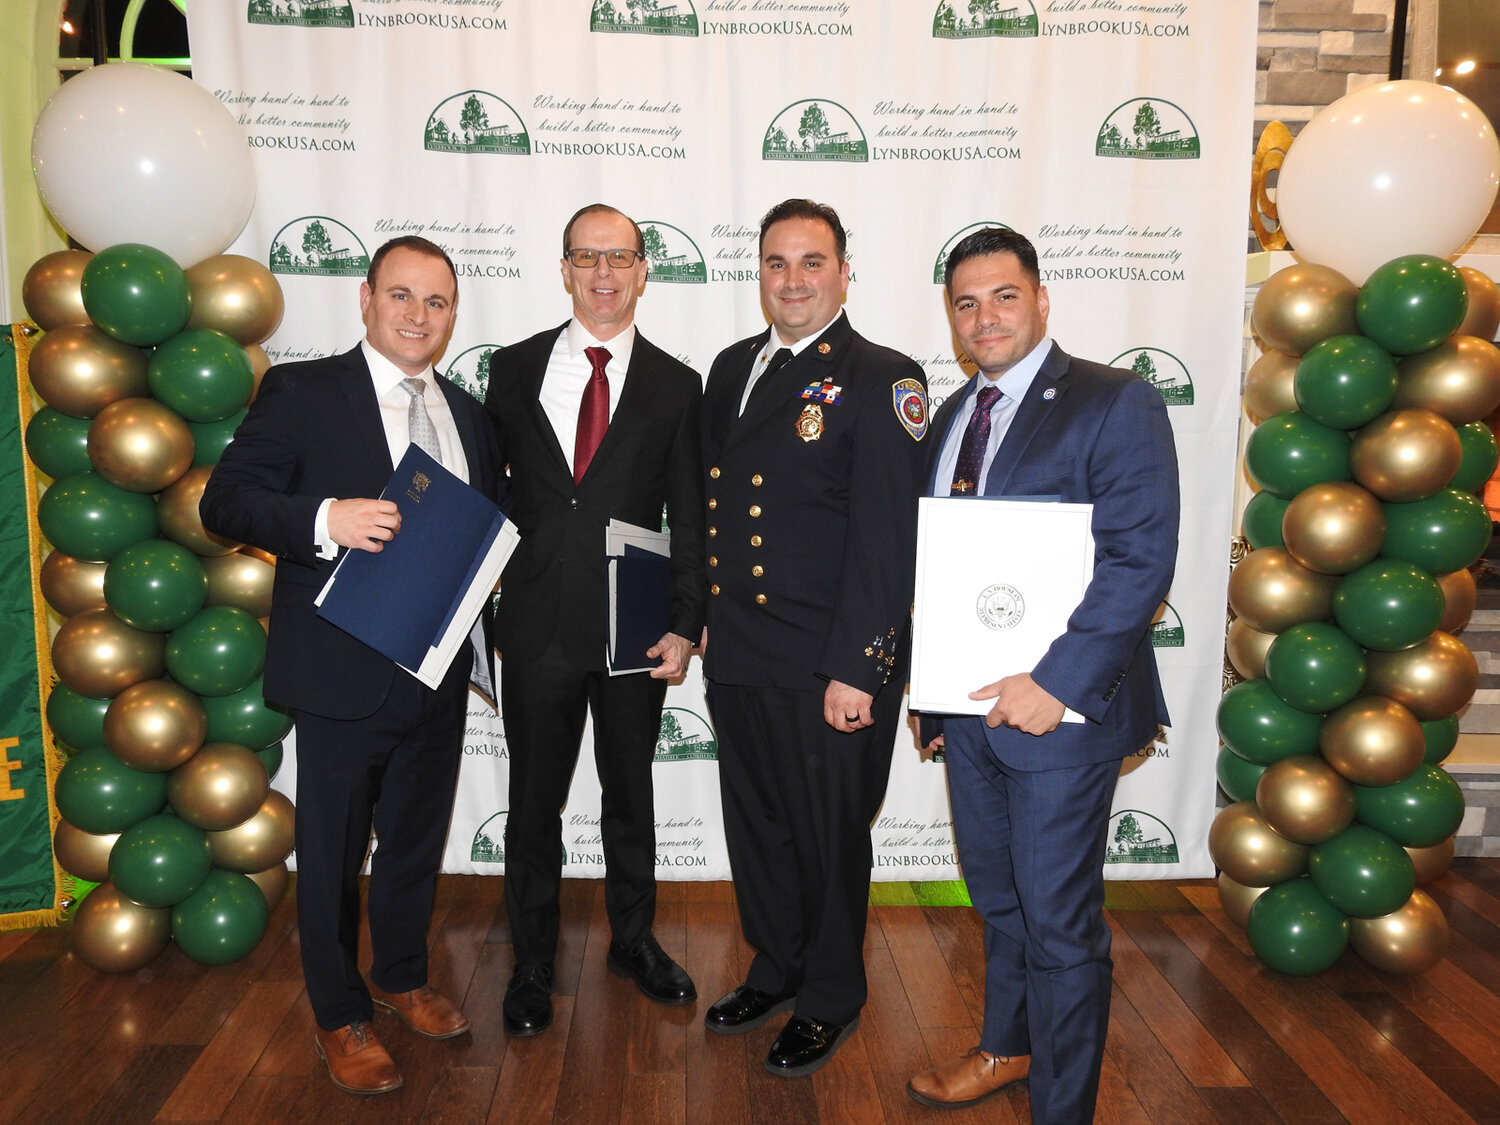 Lynbrook Chamber of Commerce honorees, from left, Benedict Tieniber, Educator of the Year; Chris Anderson, owner of Crown Ford; Chris Kelly, former chief of the Lynbrook Fire Department; and Lt. Anthony Falsitta, of the Lynbrook Police Department.